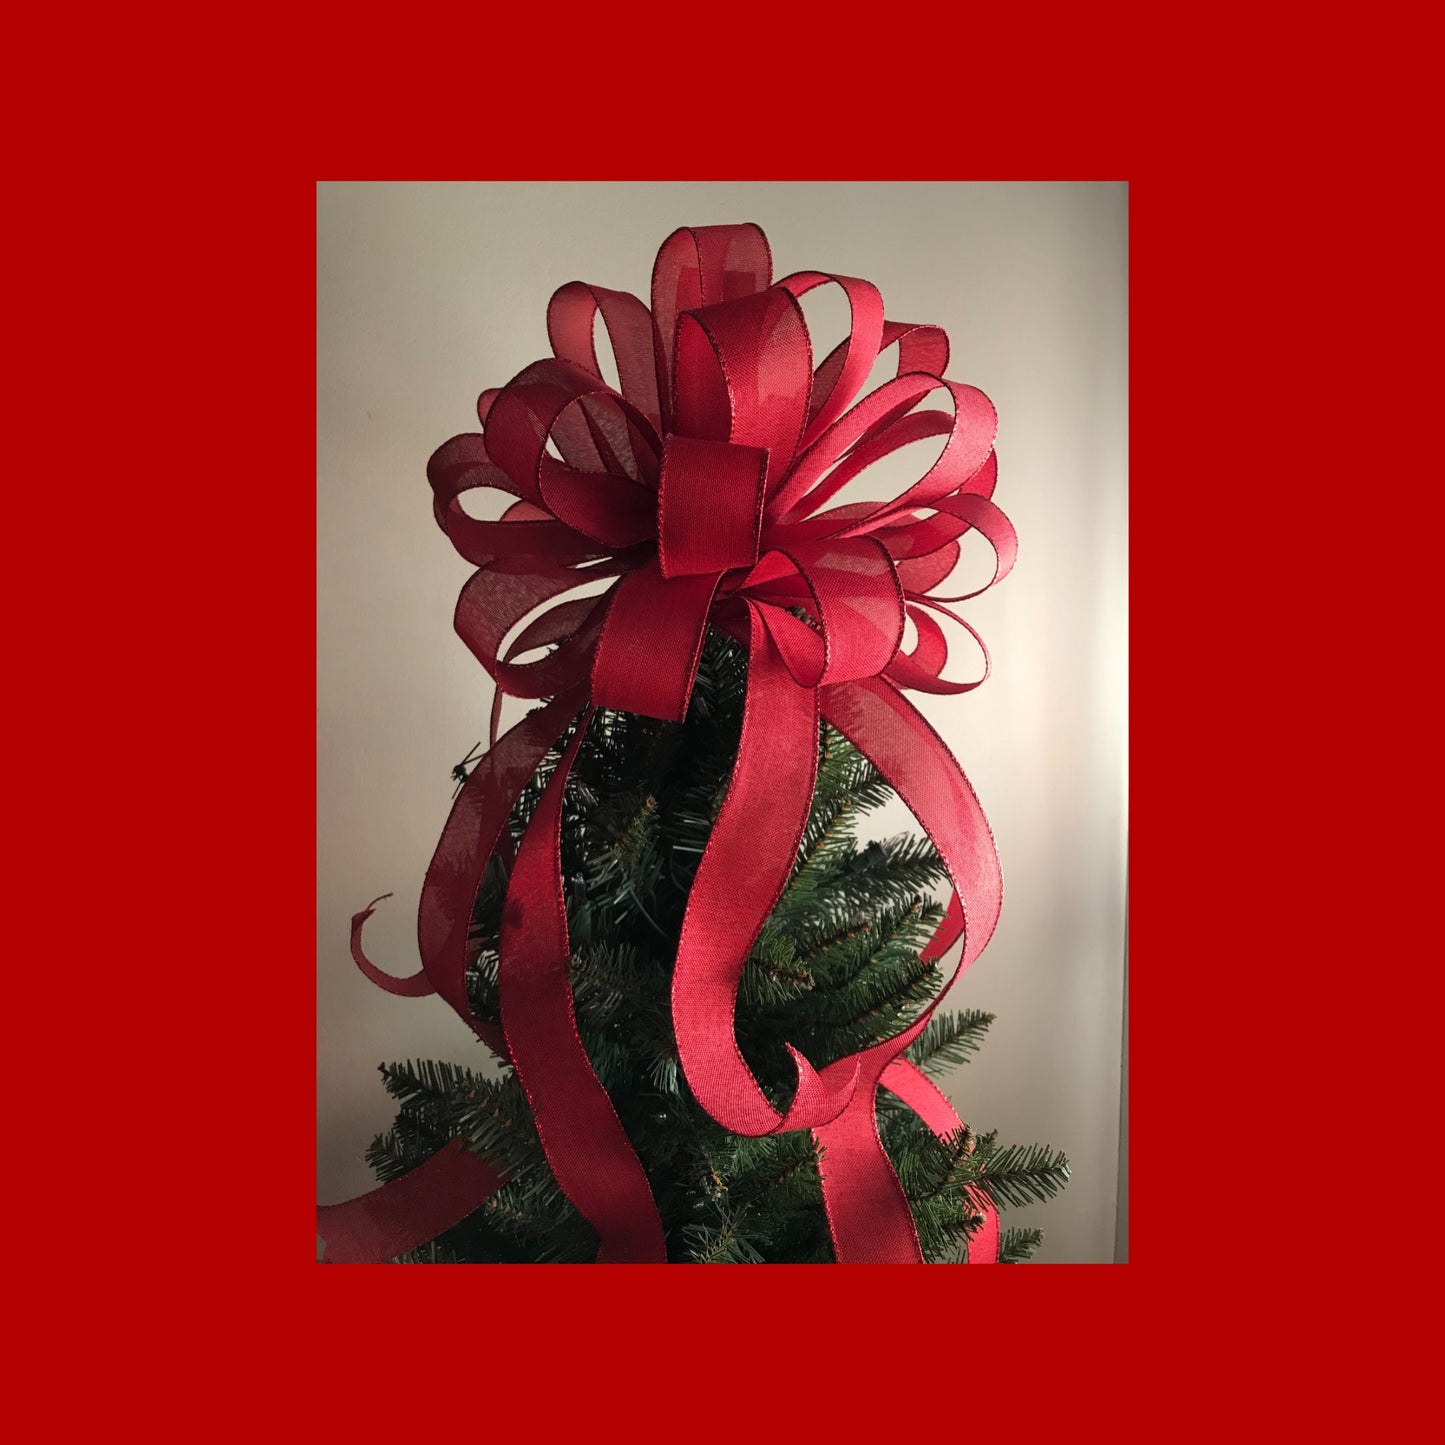 Christmas Tree Topper / Valentines Day Topper / Red Linen Tree Topper / 12" bow / Farmhouse Christmas Tree Bow